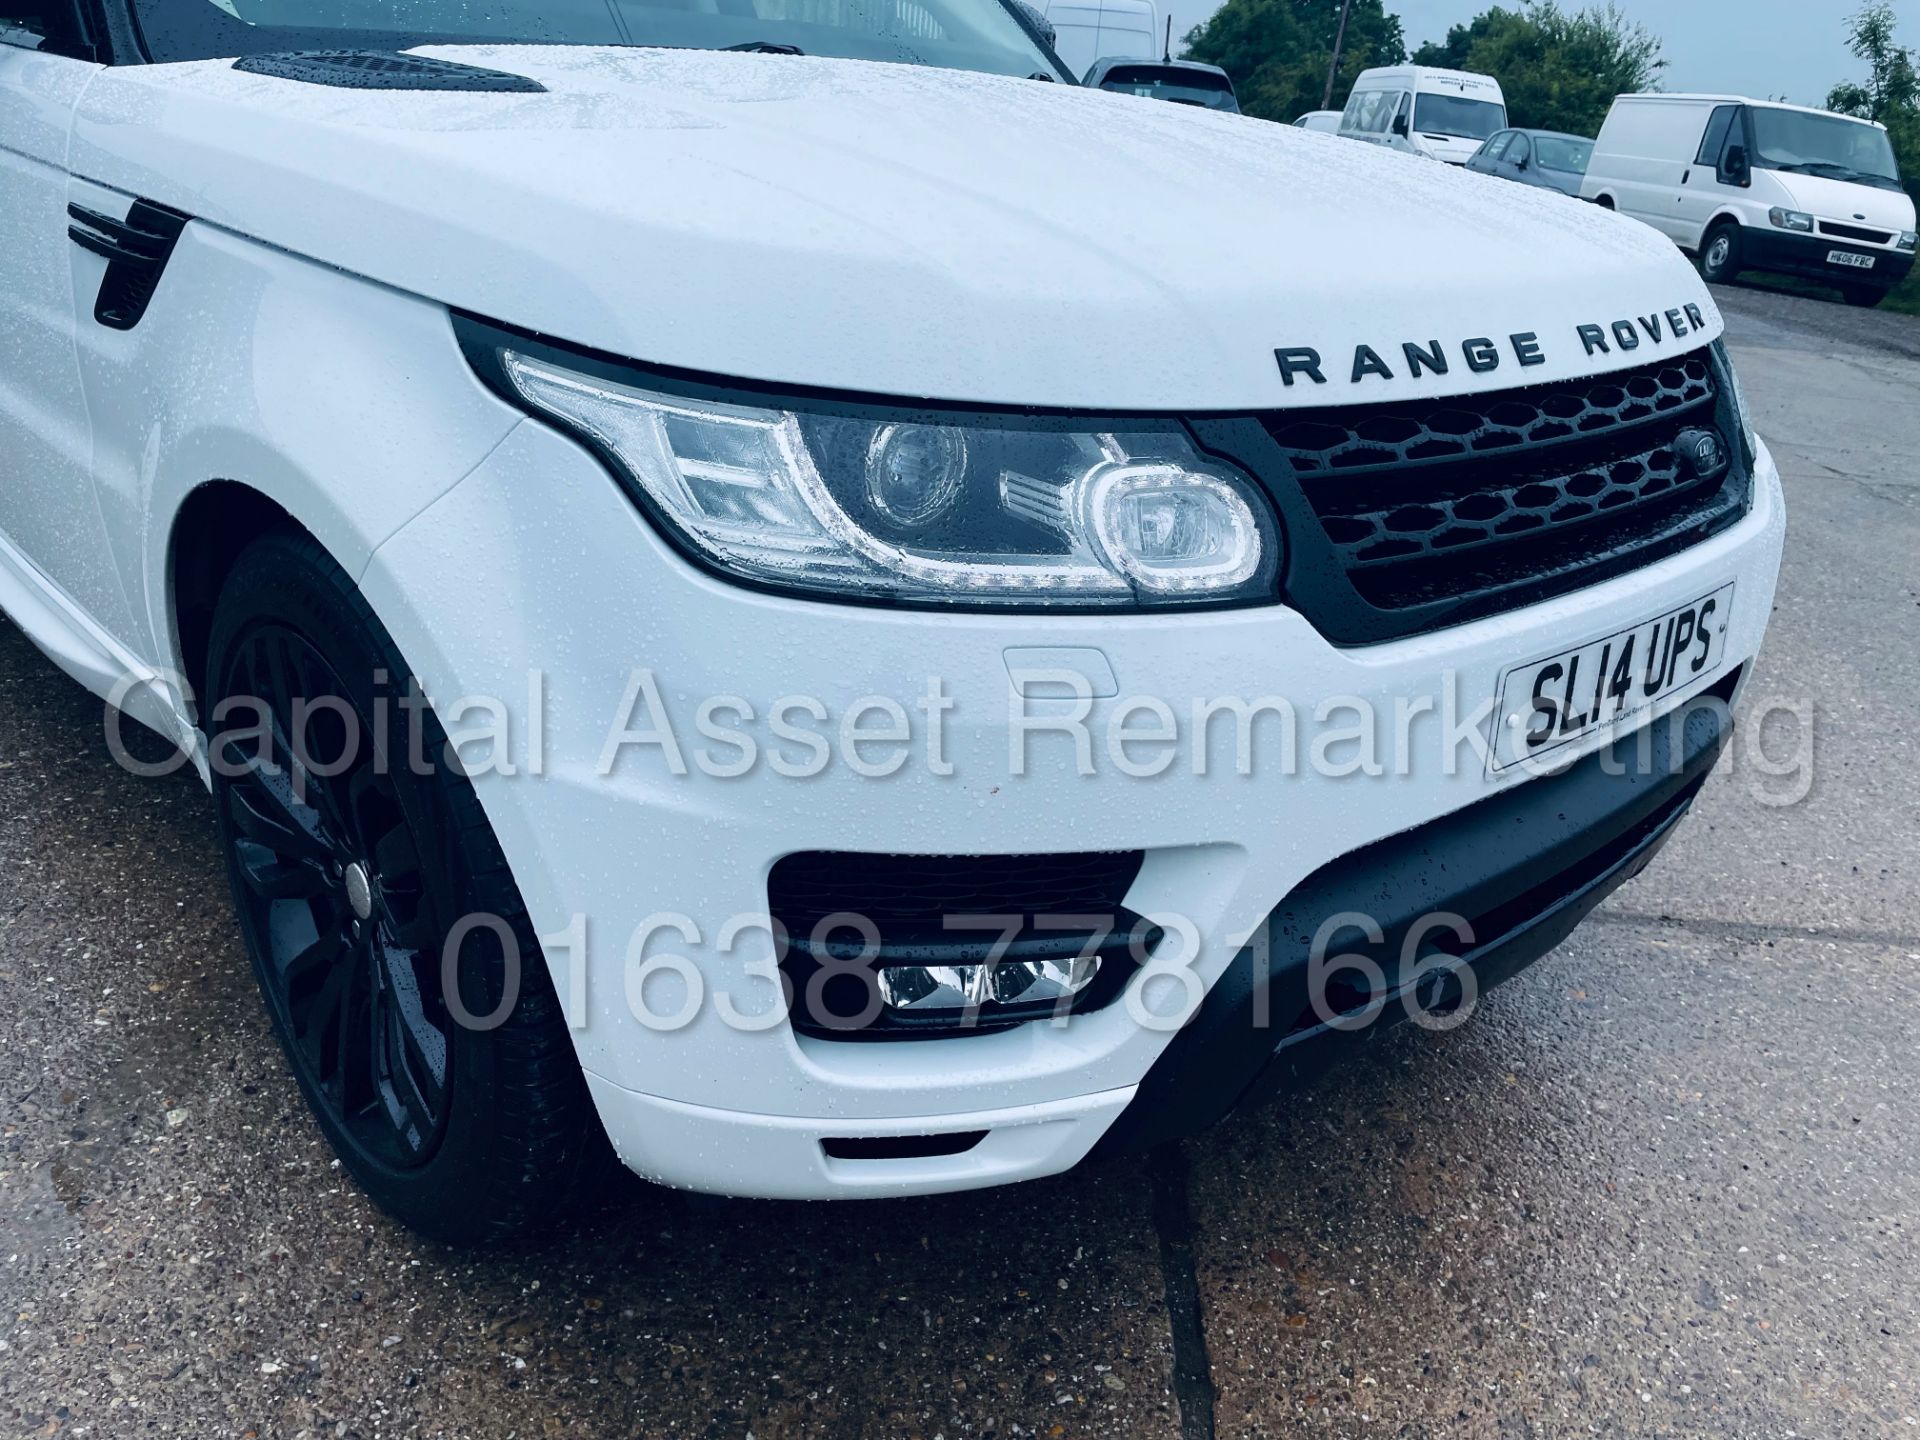 On Sale RANGE ROVER SPORT *SPECIAL EDITION* (2014) '3.0 TDV6 - AUTO' *SAT NAV & PAN ROOF* (TOP SPEC) - Image 15 of 54